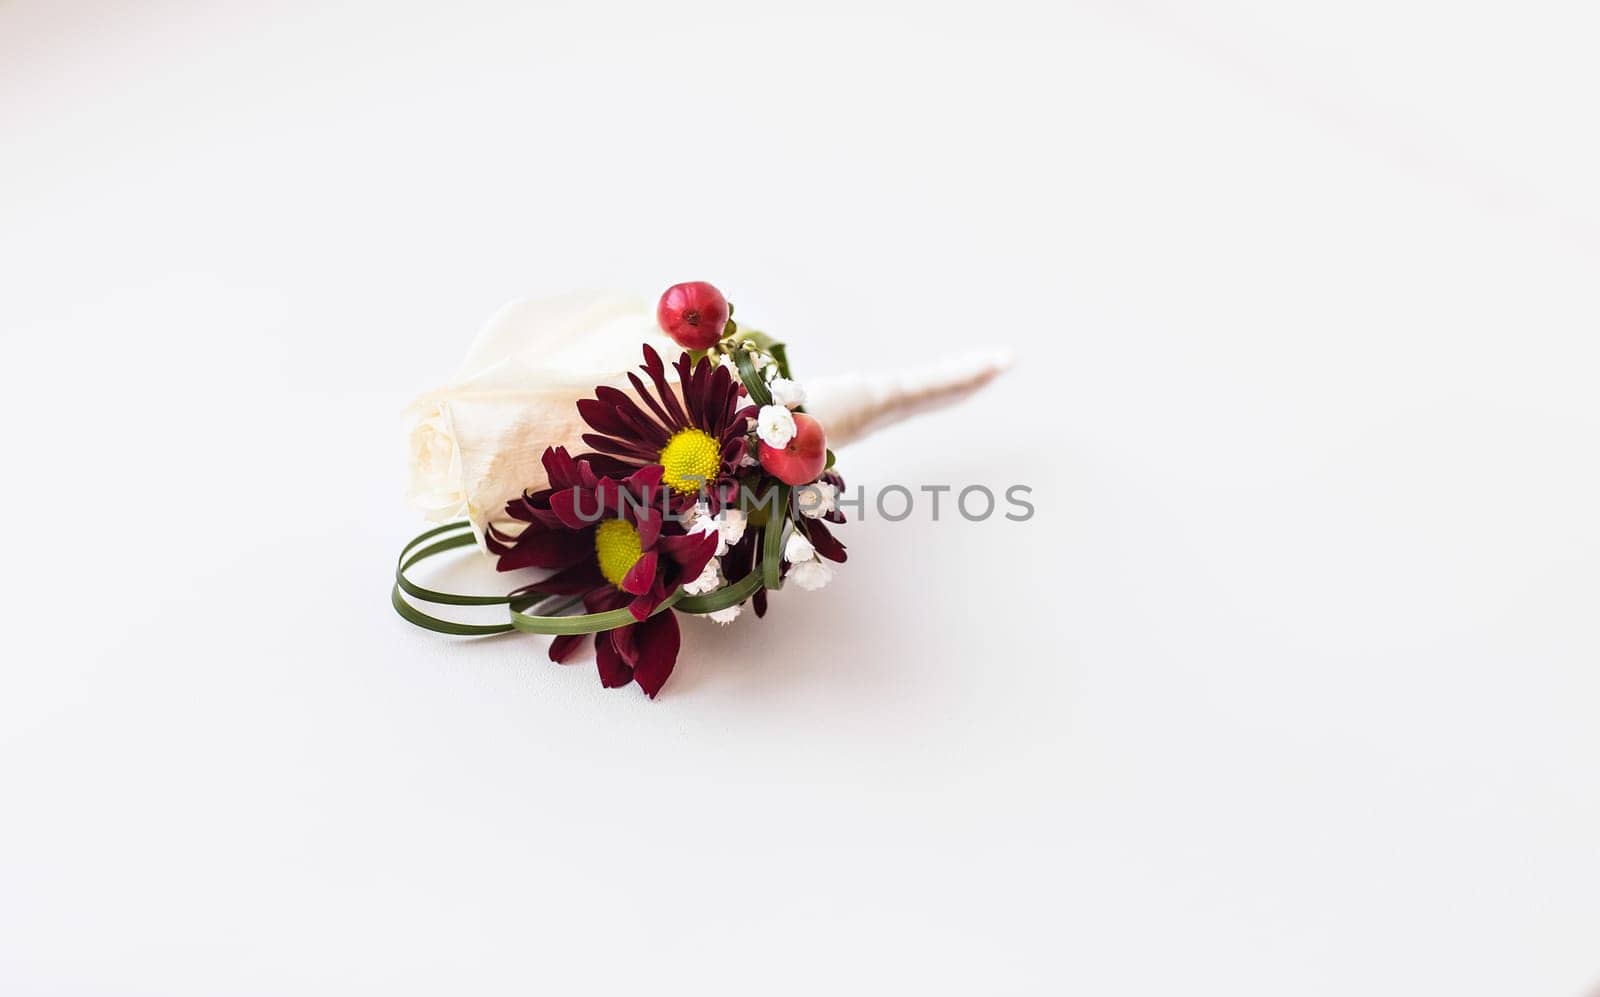 Gentle groom's boutonniere by Satura86